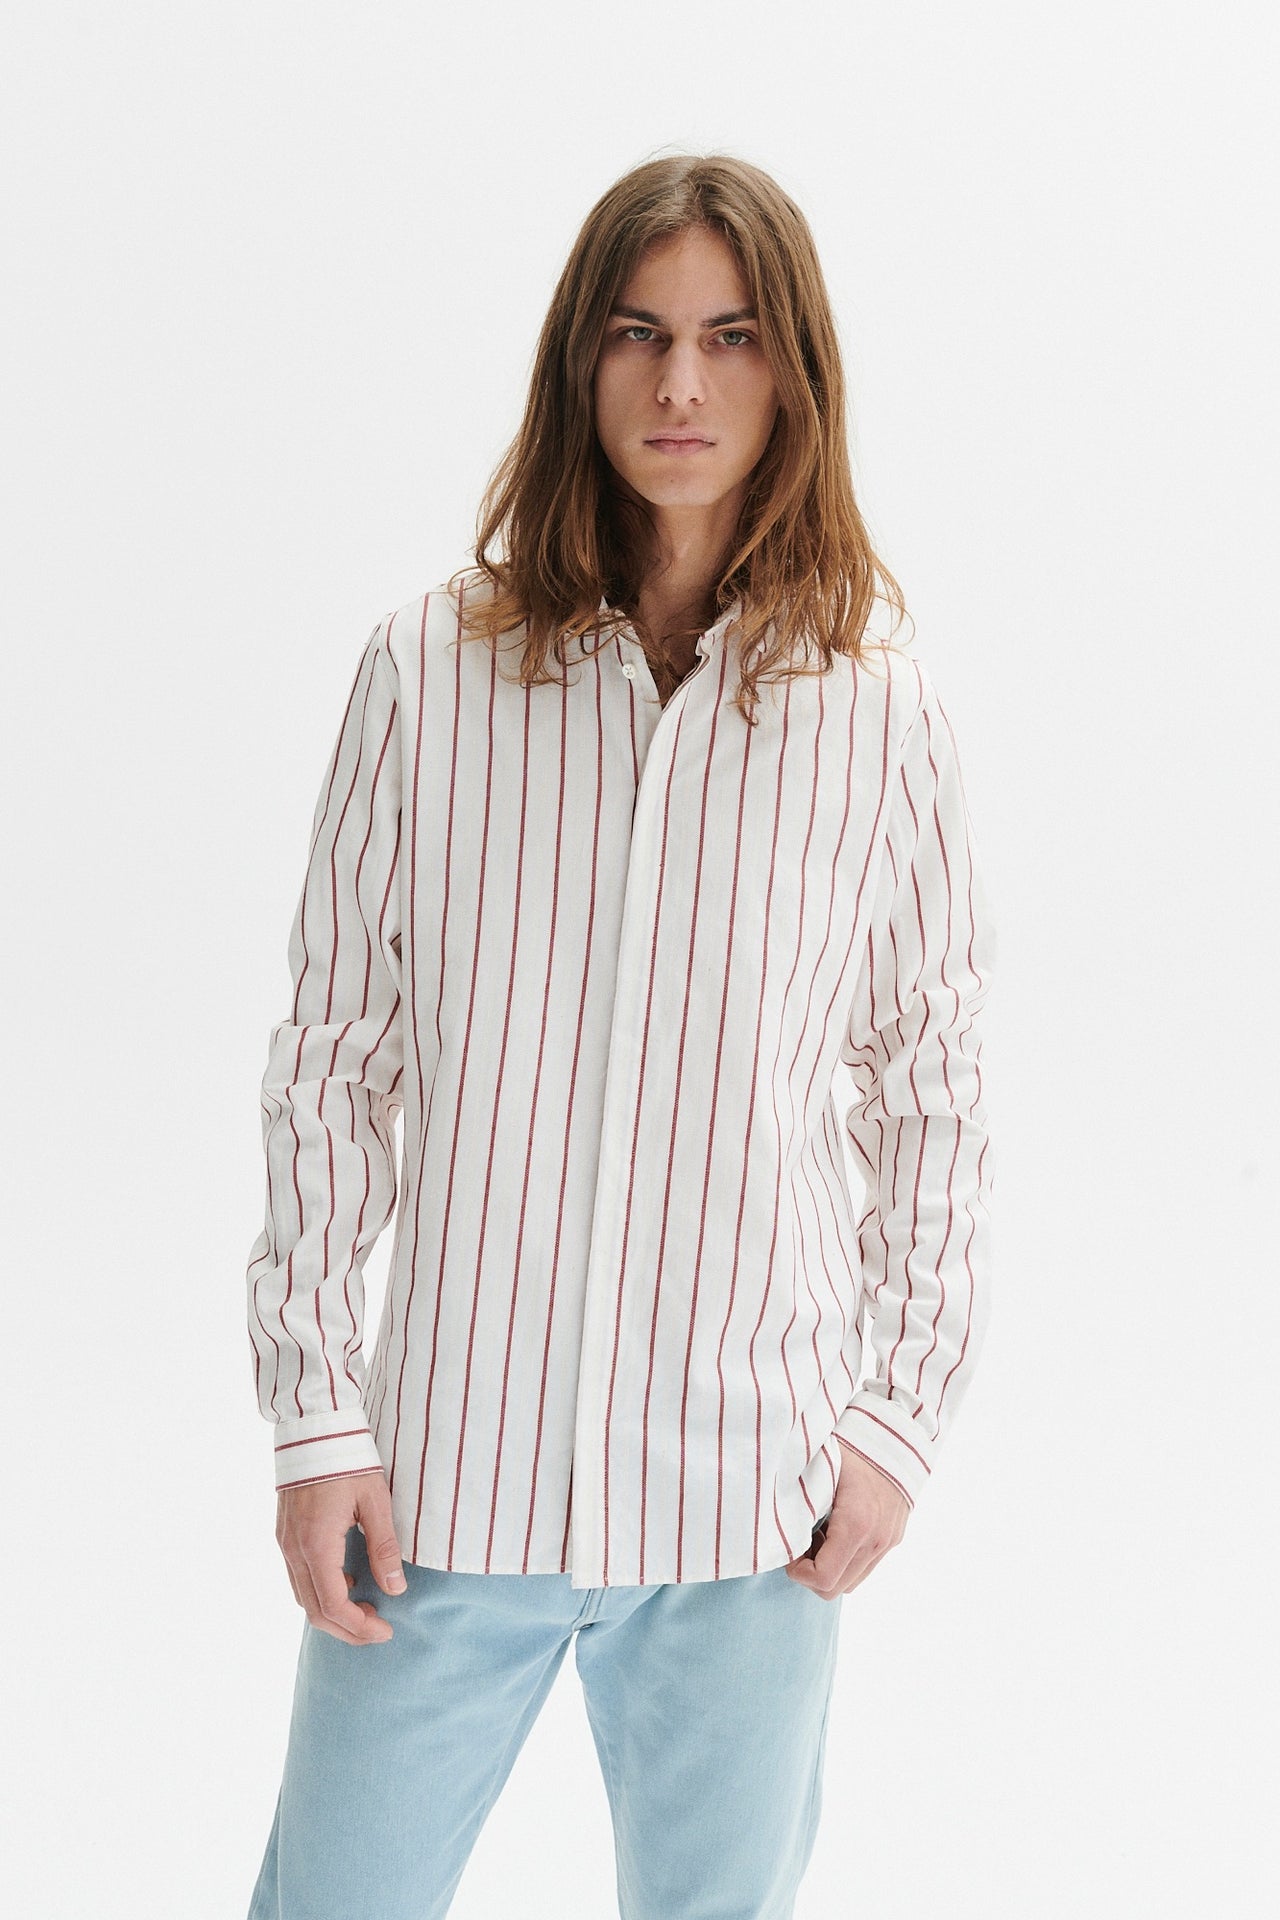 Cute Round Collar Shirt in a White and Wine Red Striped Italian Organic Cotton